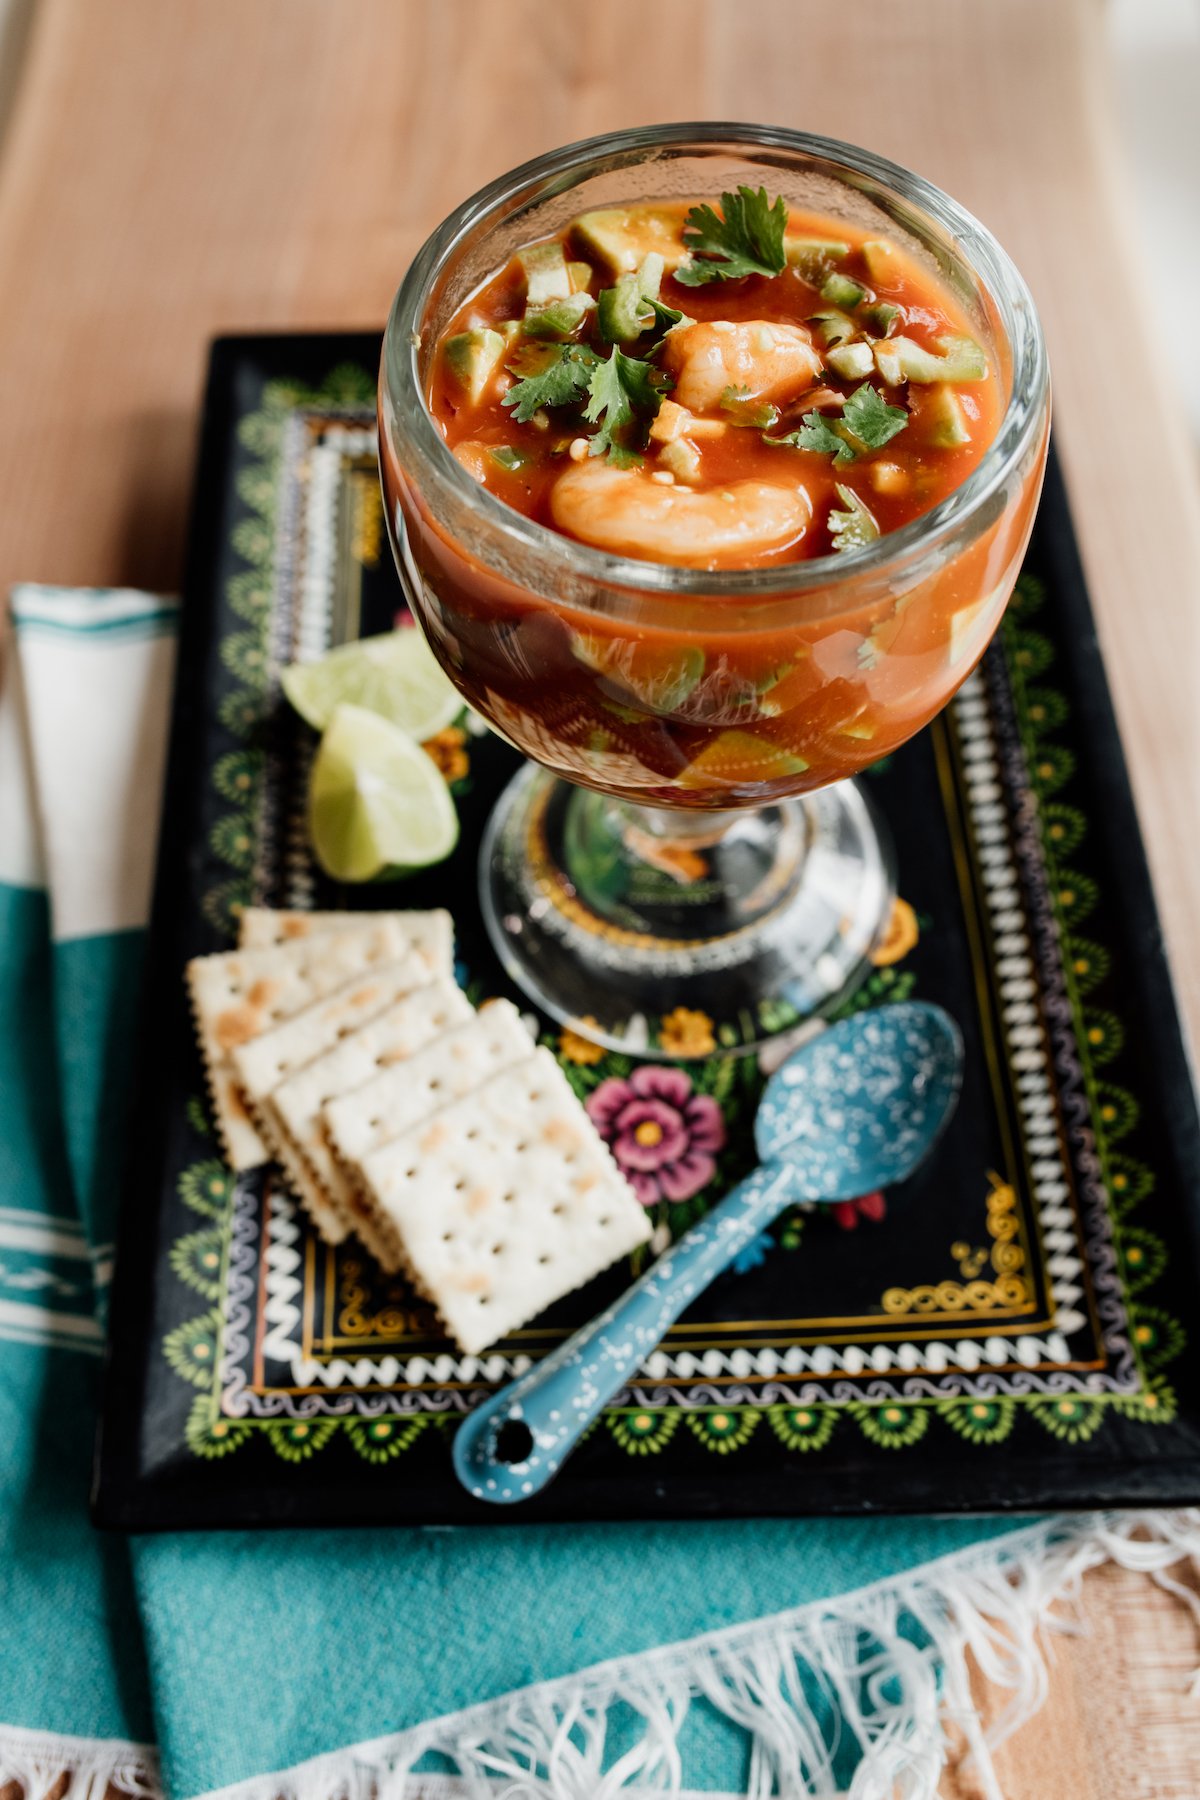 mexican shrimp cocktail (a.k.a. coctel de camarones) in a glass on a rectangular black plate with saltines.